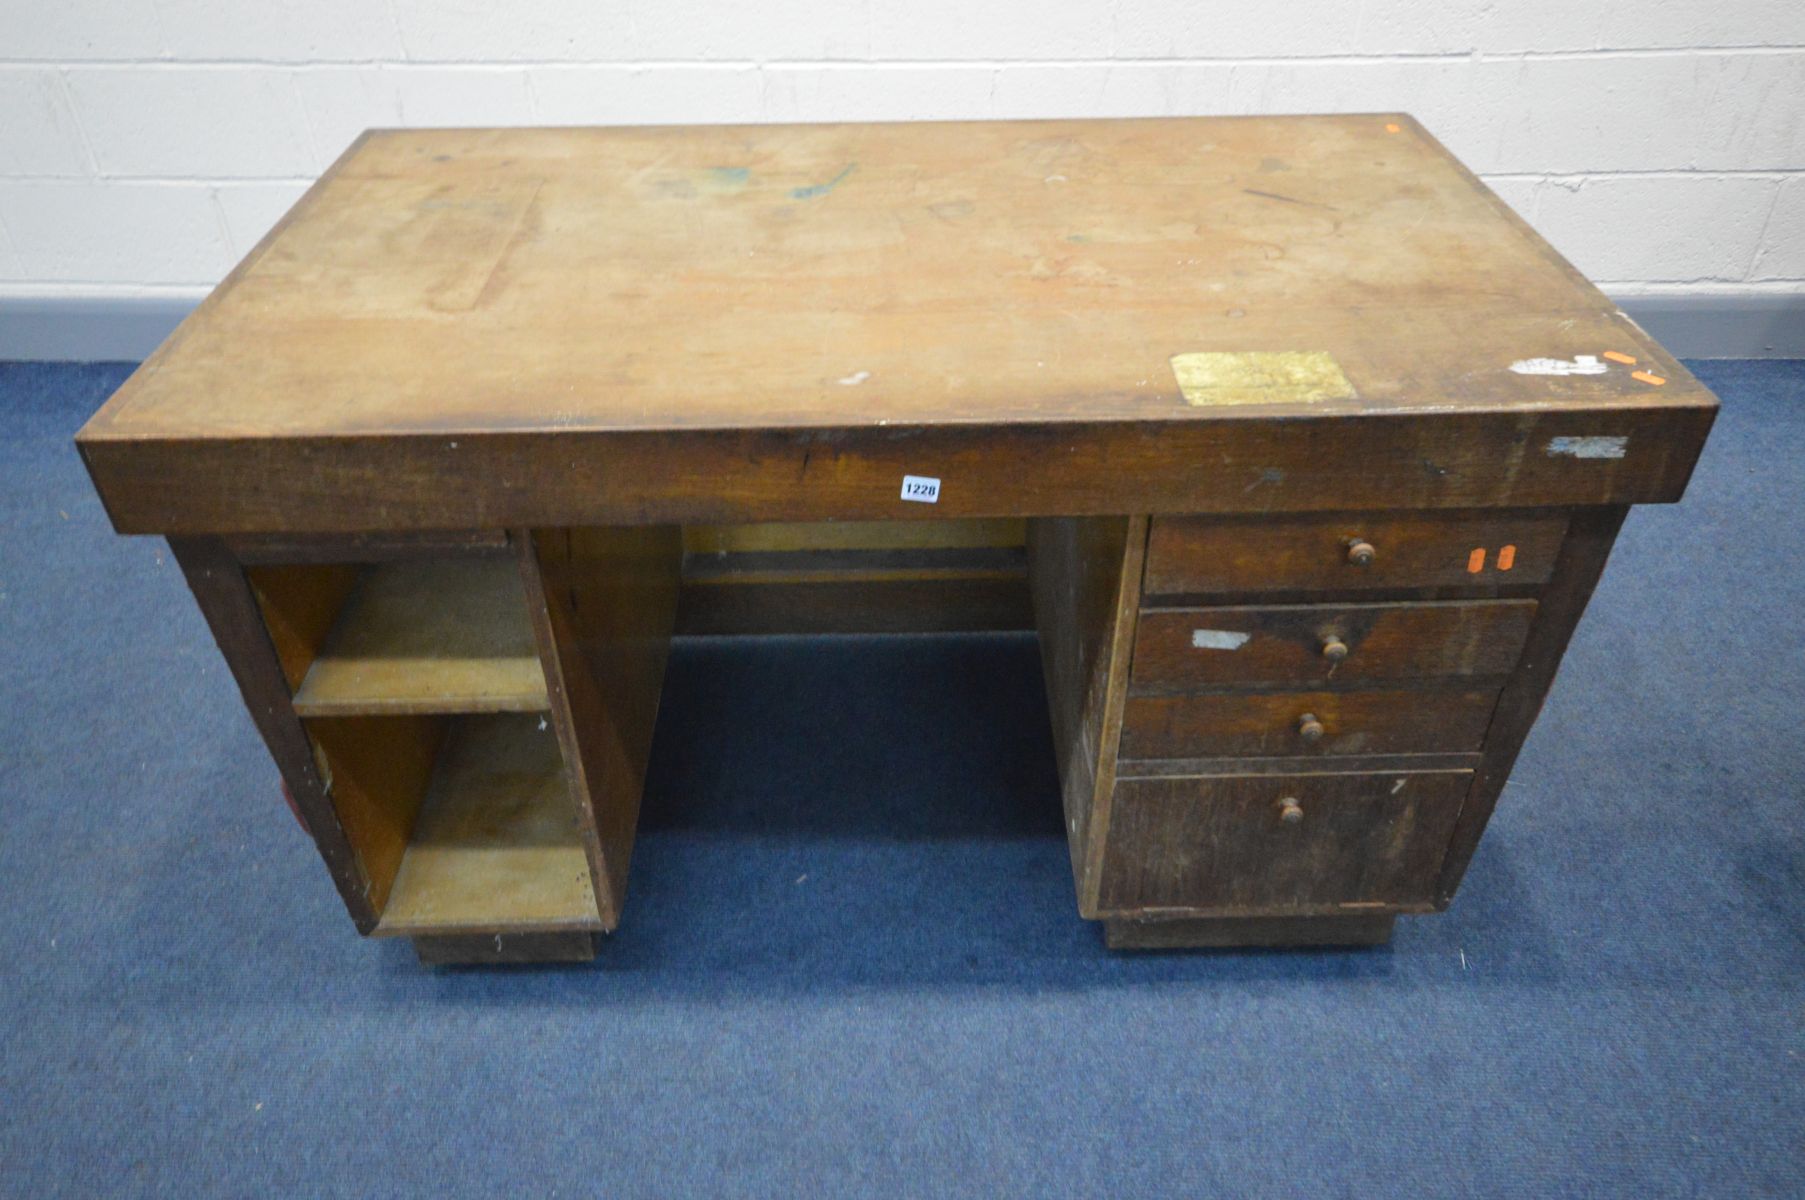 AN EARLY 20TH CENTURY OAK AND RED LEATHERETTE BUTTON SIDED KNEE HOLE DESK, with a bank of four